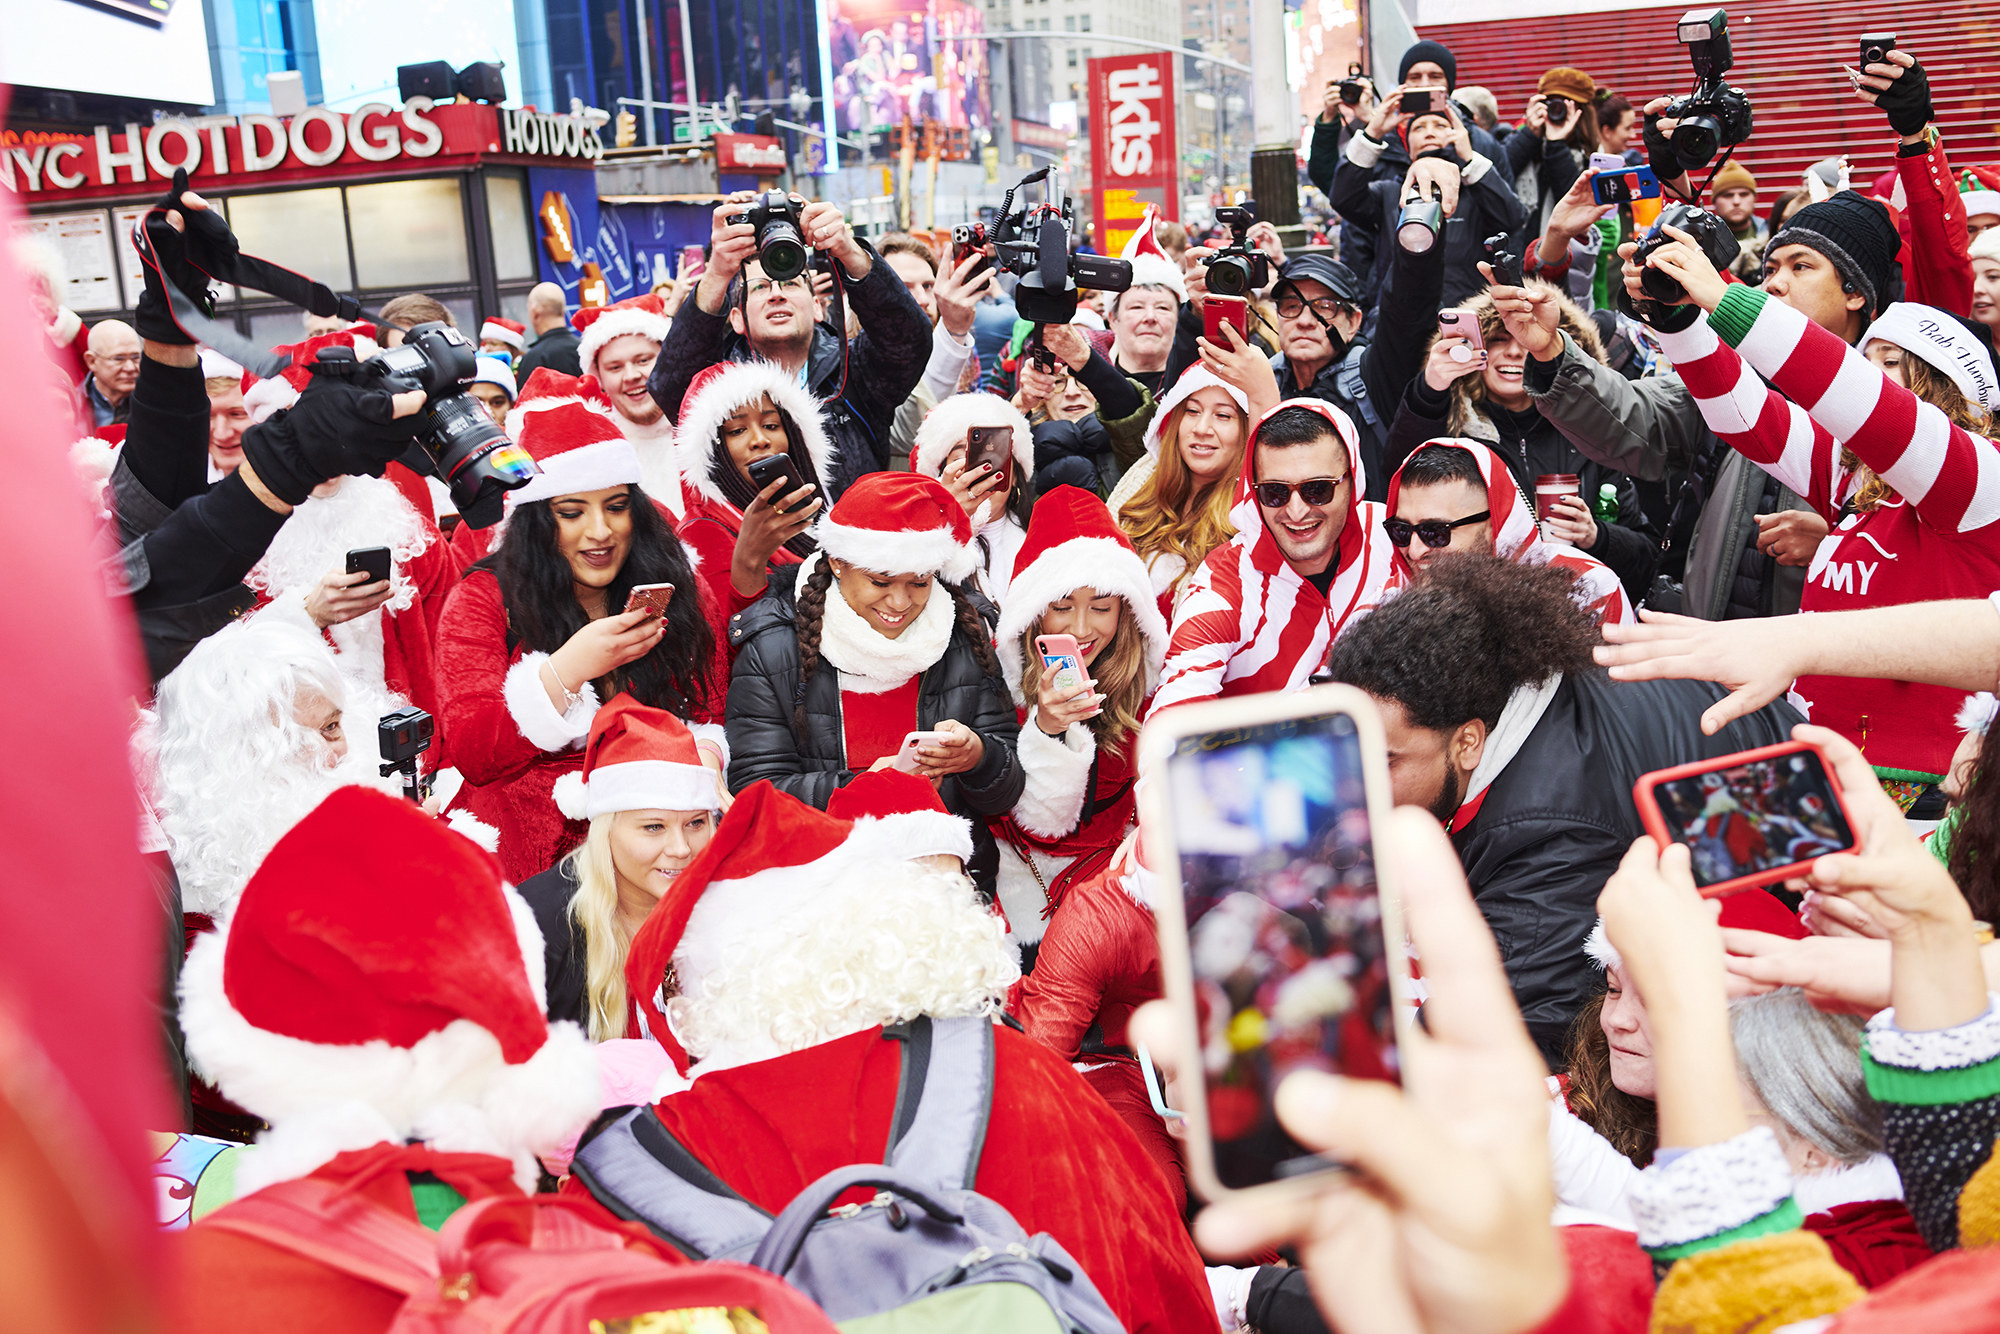 People dressed as Santa Claus gather at Father Duffy Square for SantaCon in New York City as a crowd of non-Santas take pictures behind them